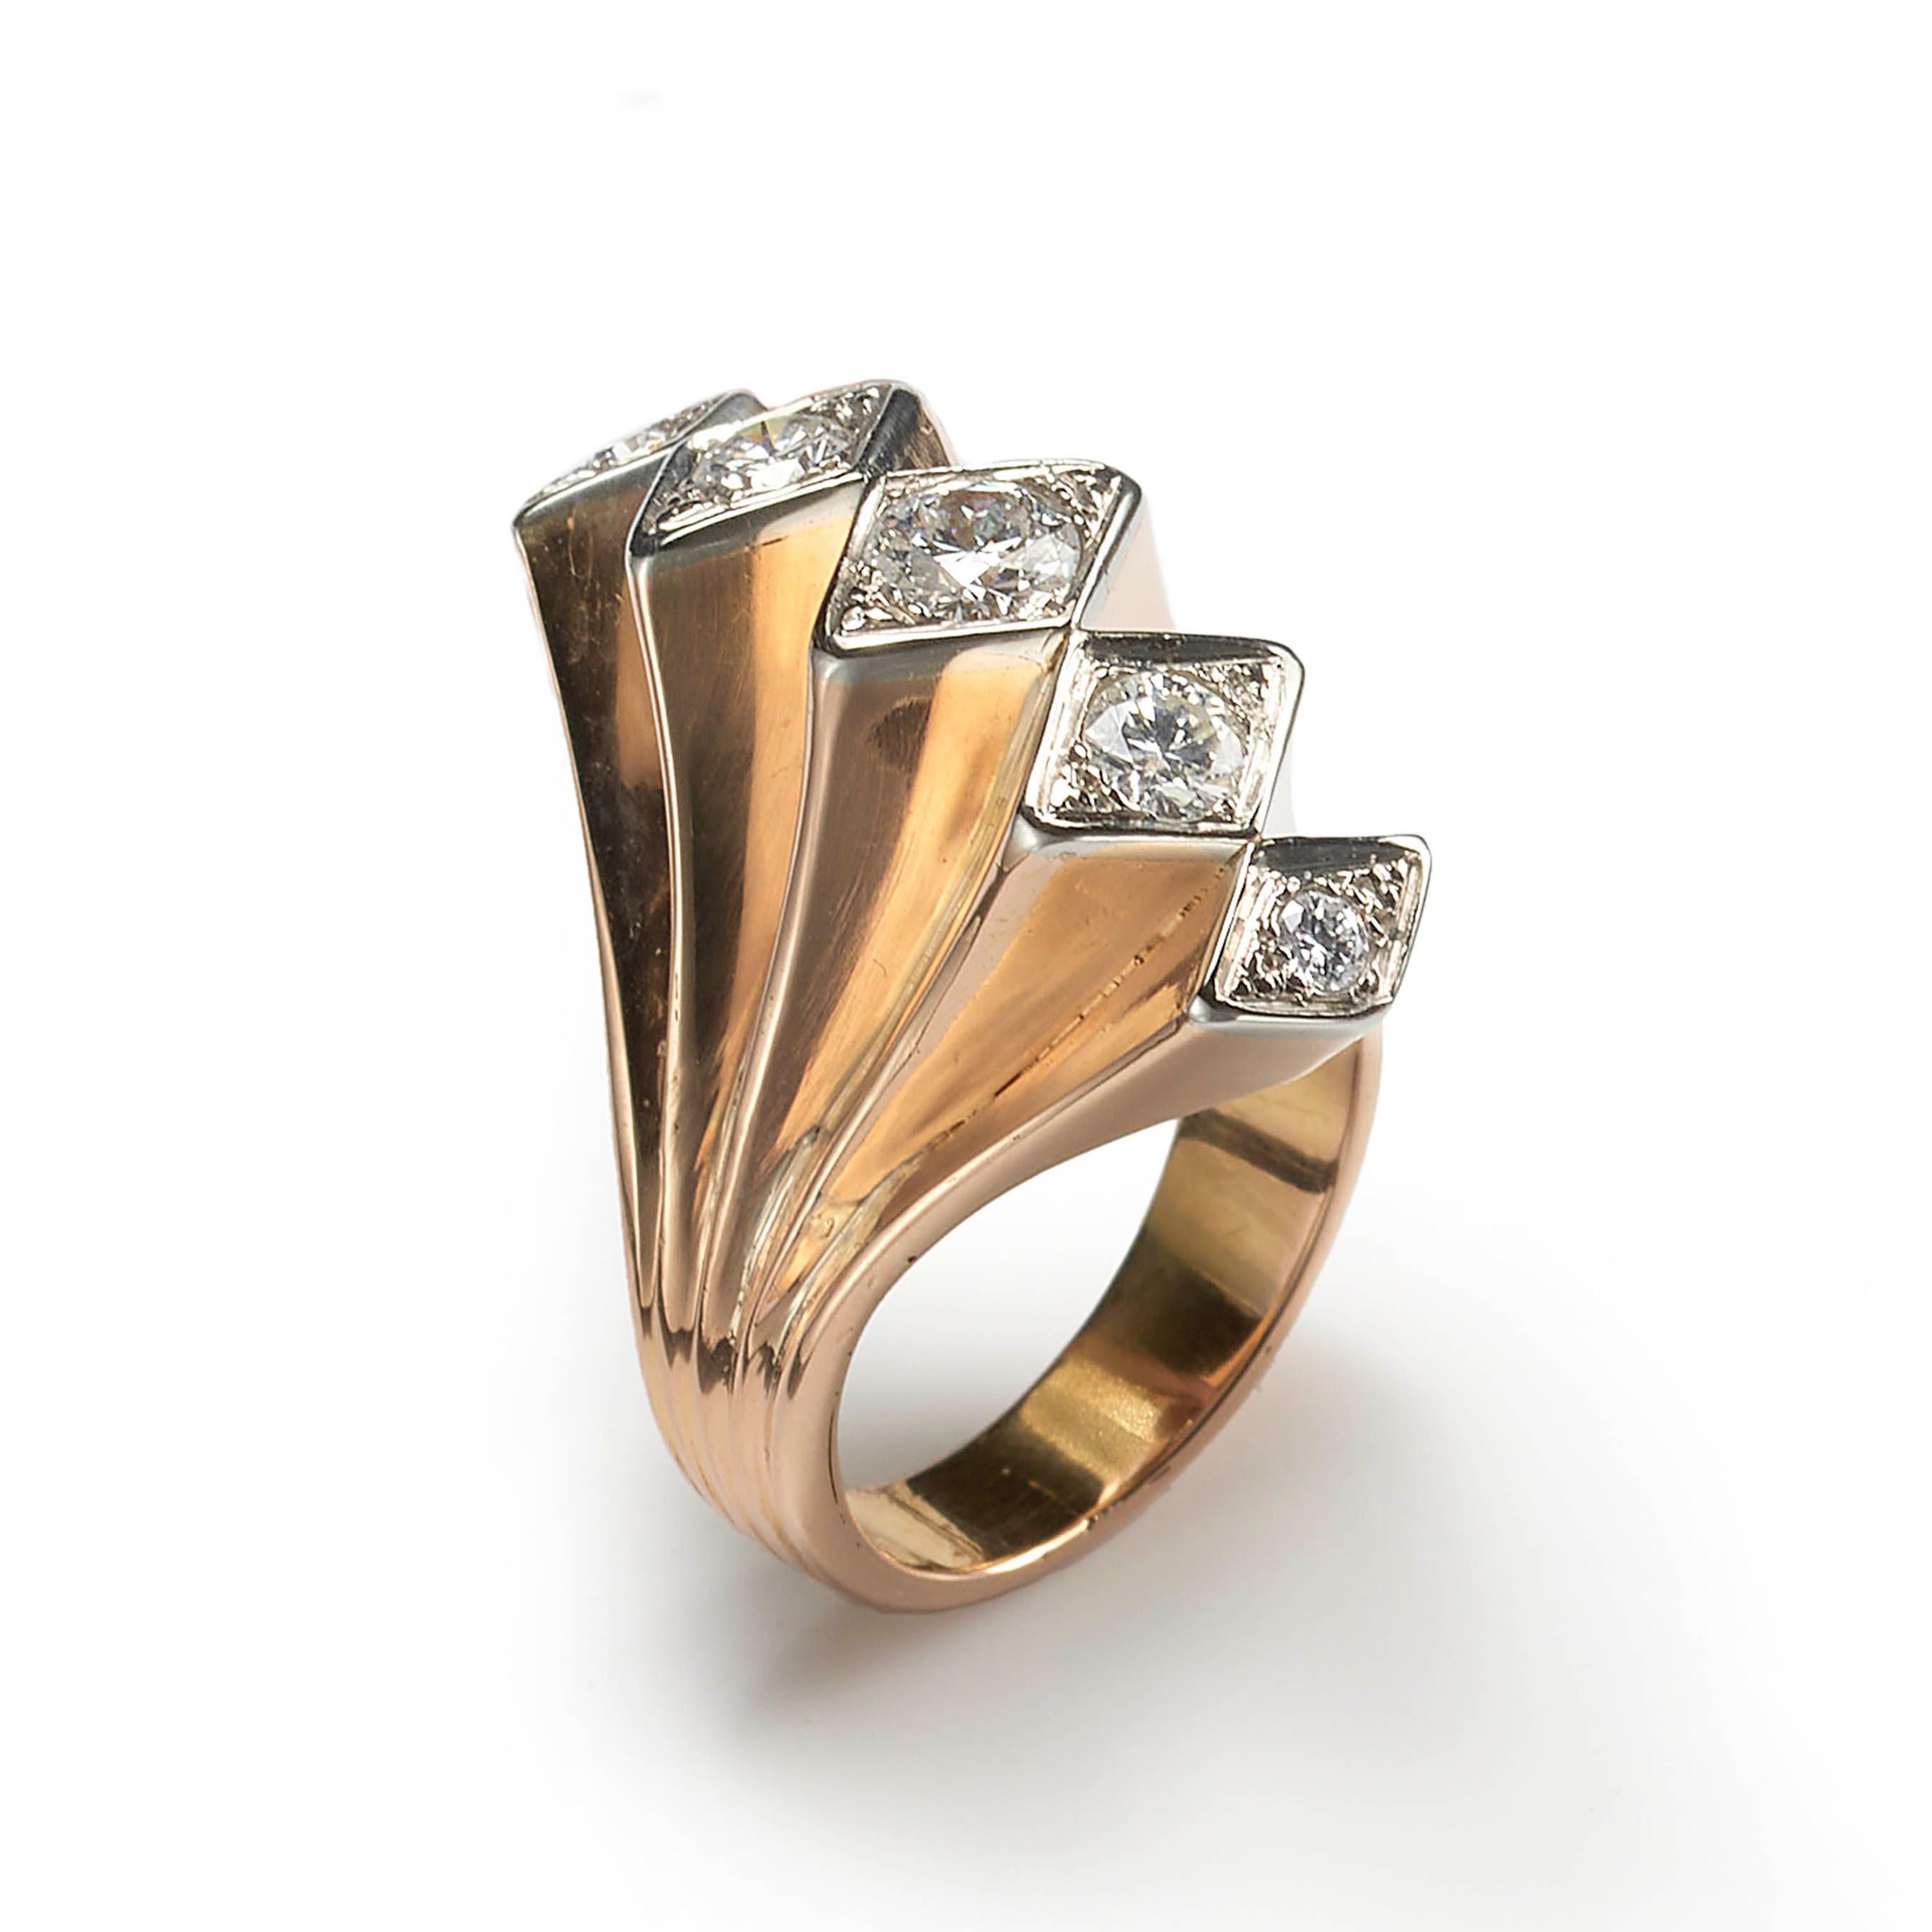 A vintage, diamond and gold five row fan ring, with five, graduating, round brilliant-cut diamonds, in the centre of each row, in white gold rhombus shaped grain settings, with concertina fan shaped shoulders, mounted in 18ct gold, circa 1940, with